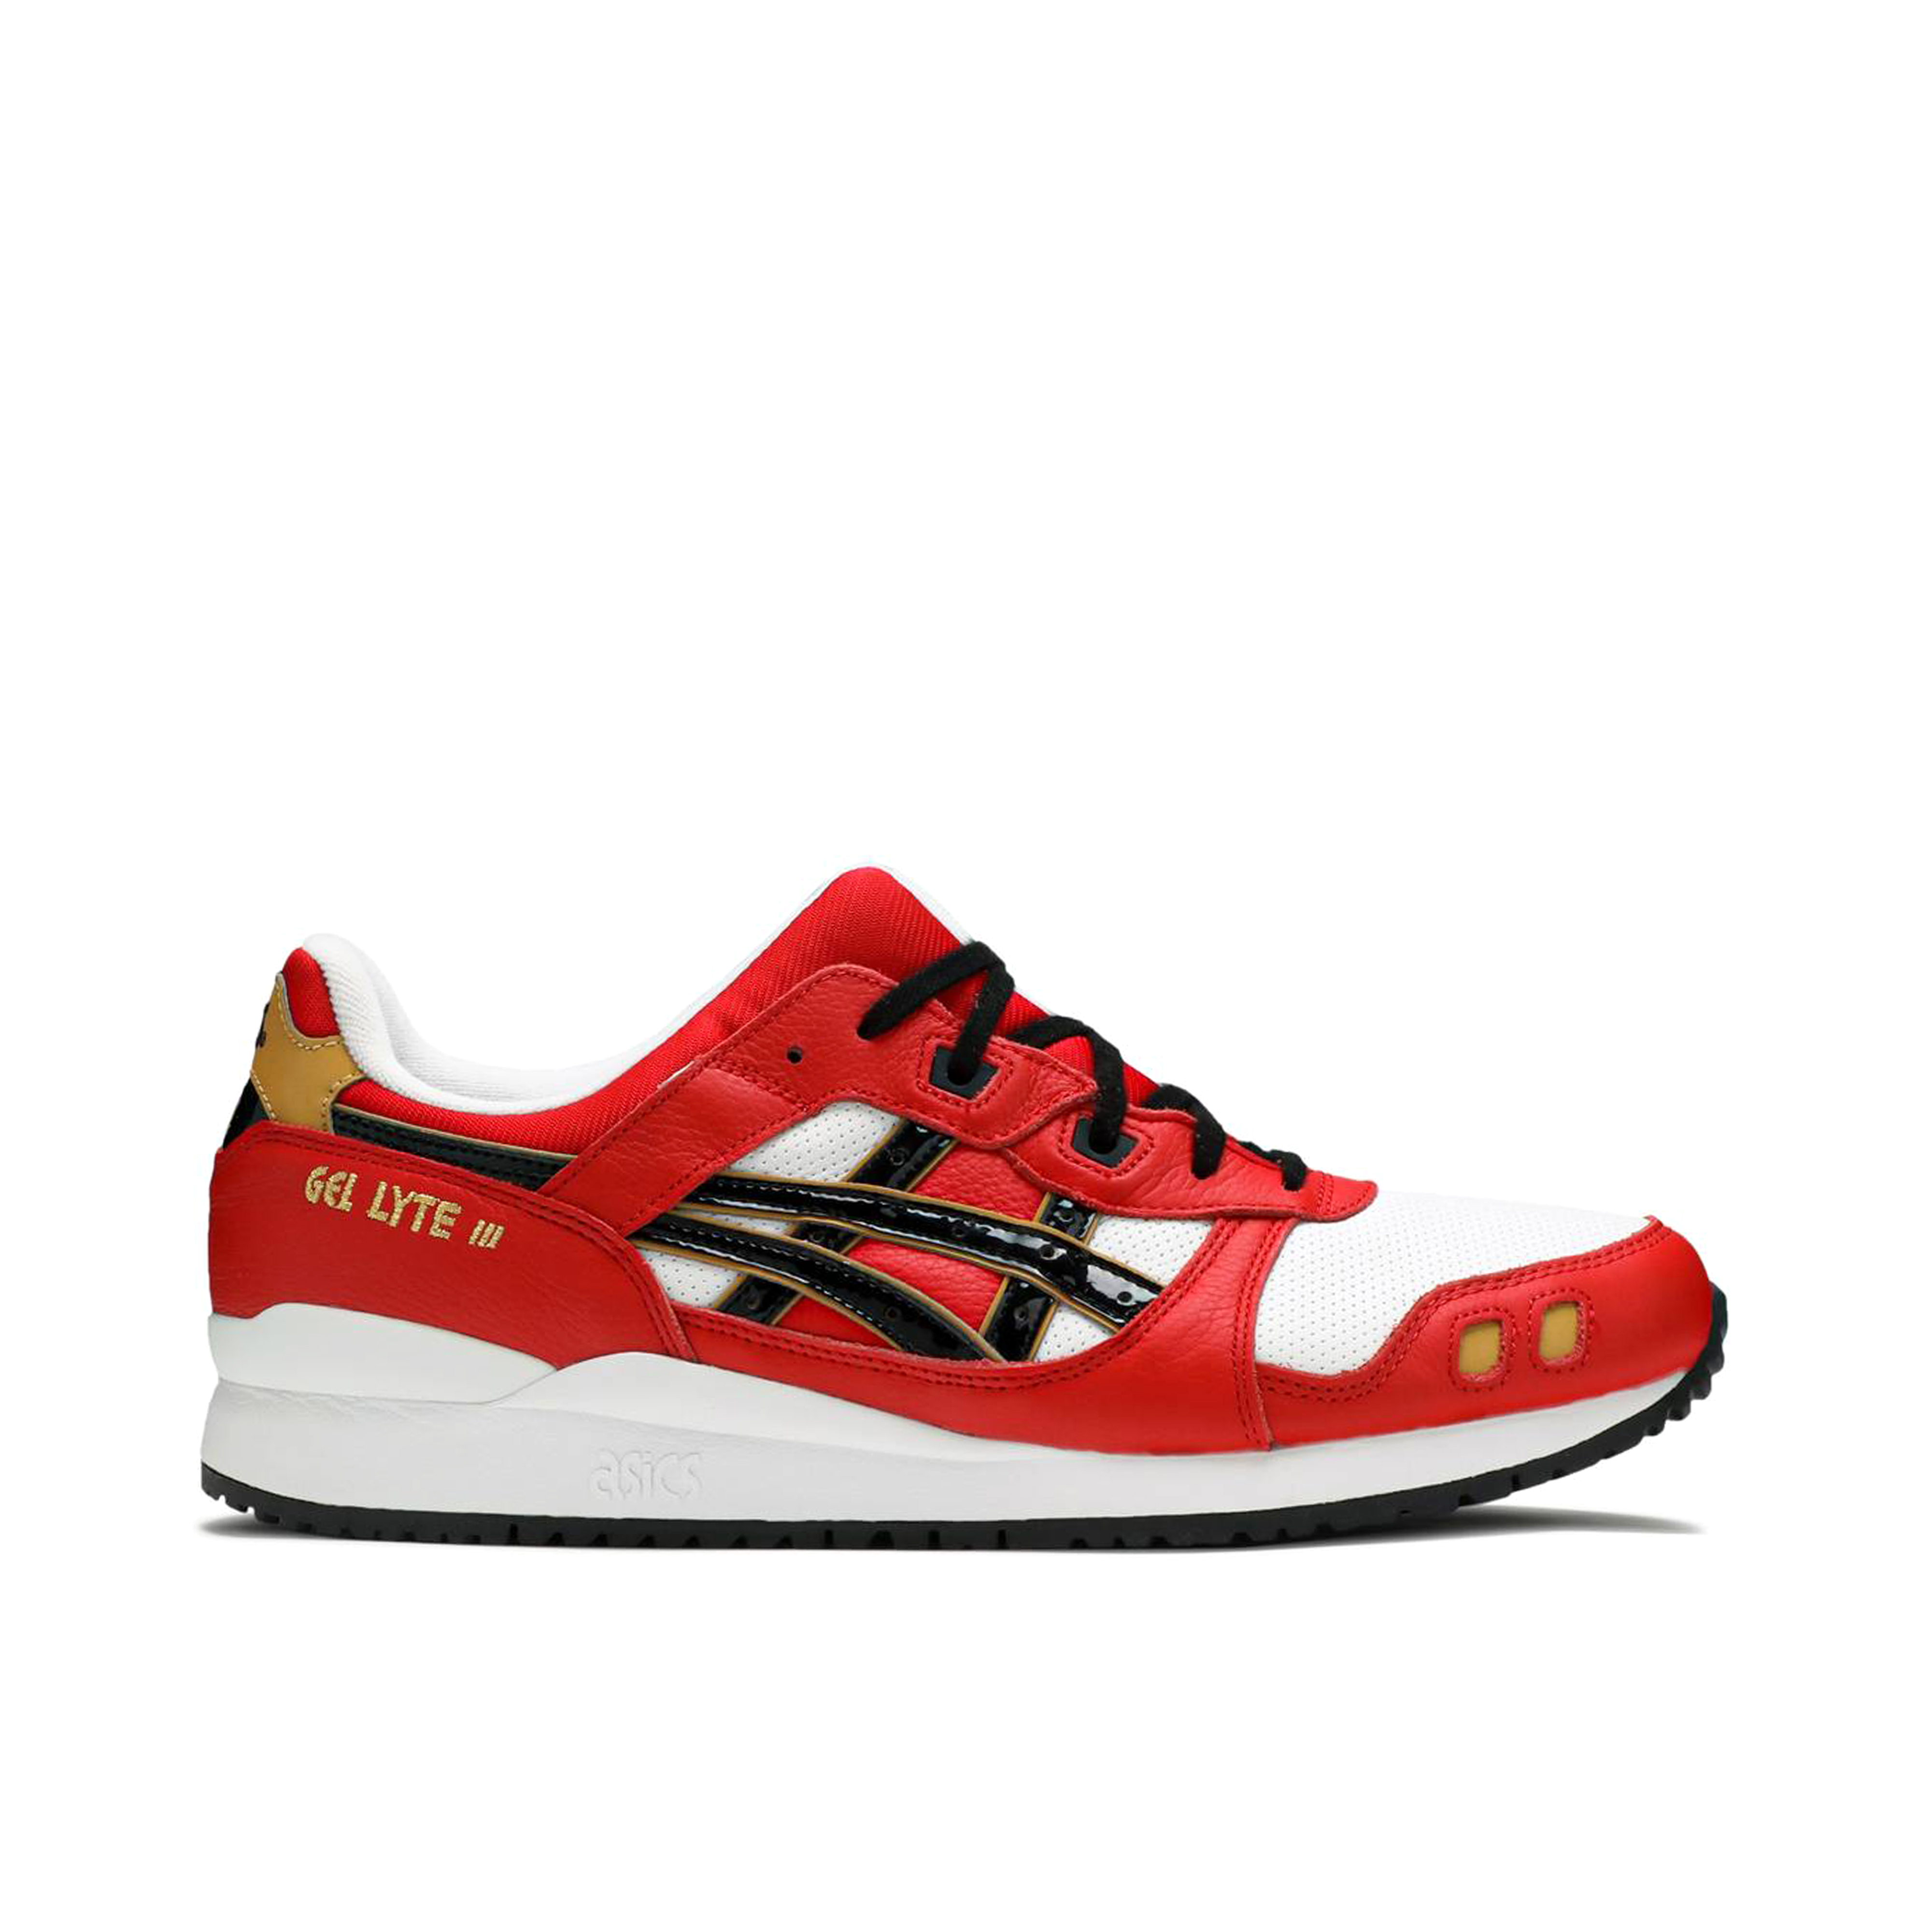 ASICS Gel-Lyte III OG Classic Red 1201A180-600 Laced